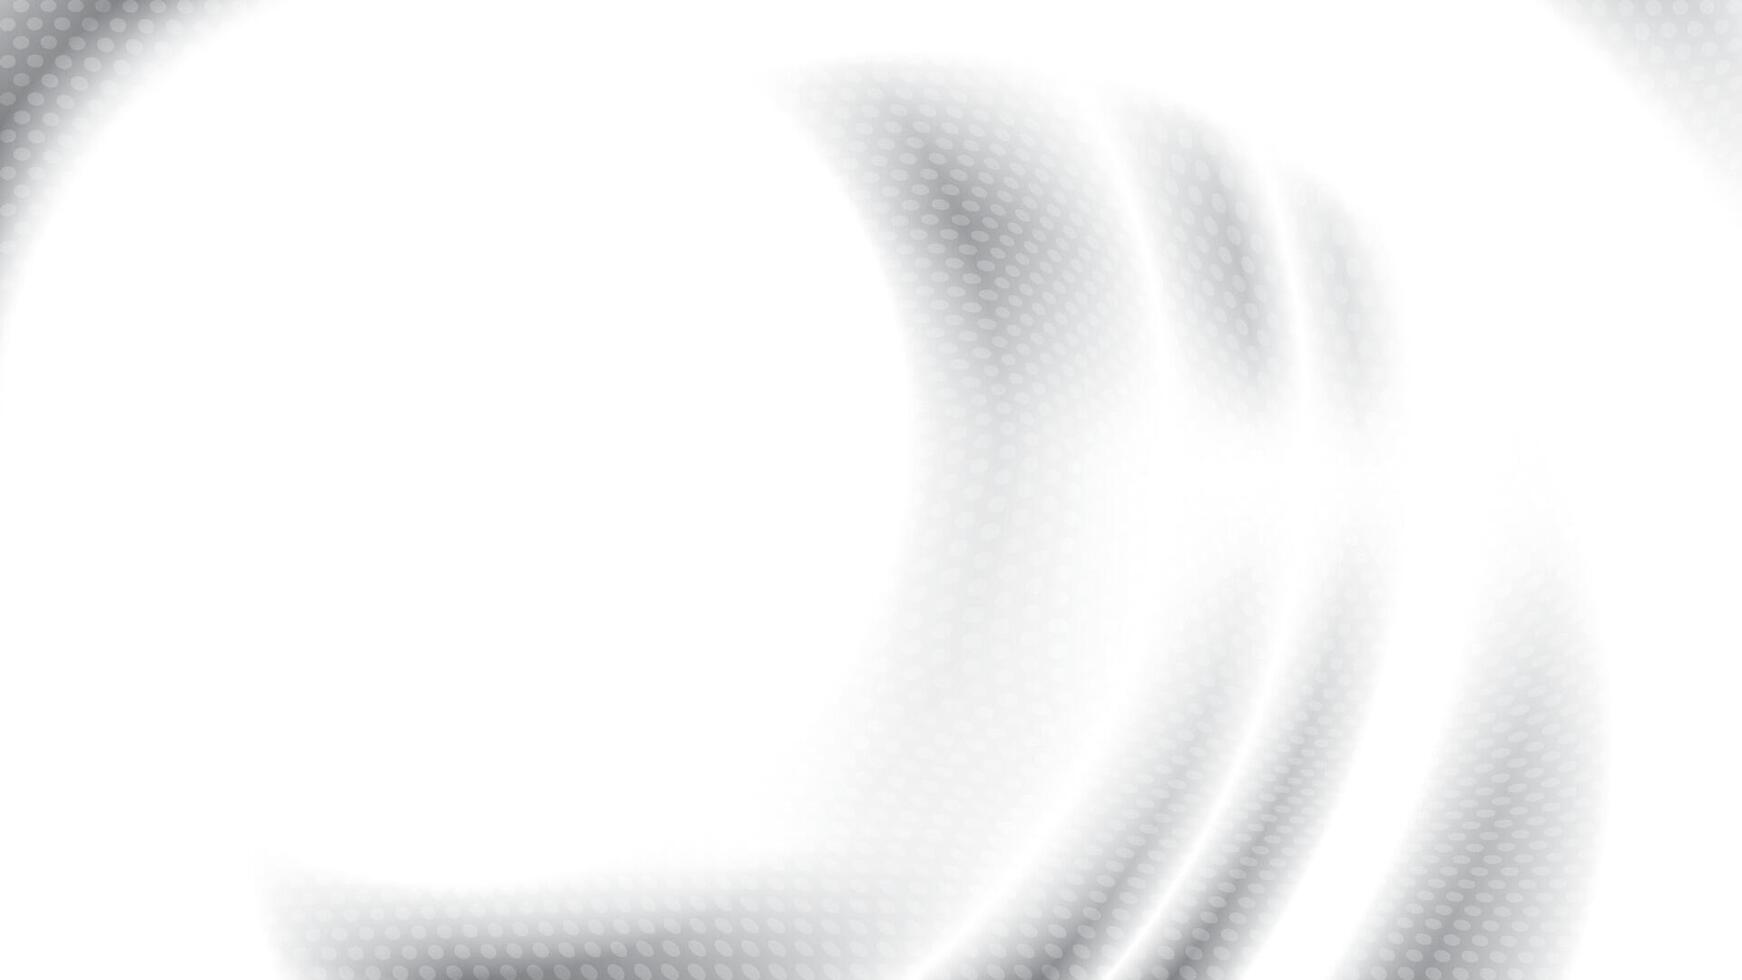 Abstract white and gray color background with halftone effect, dot pattern. Vector illustration.